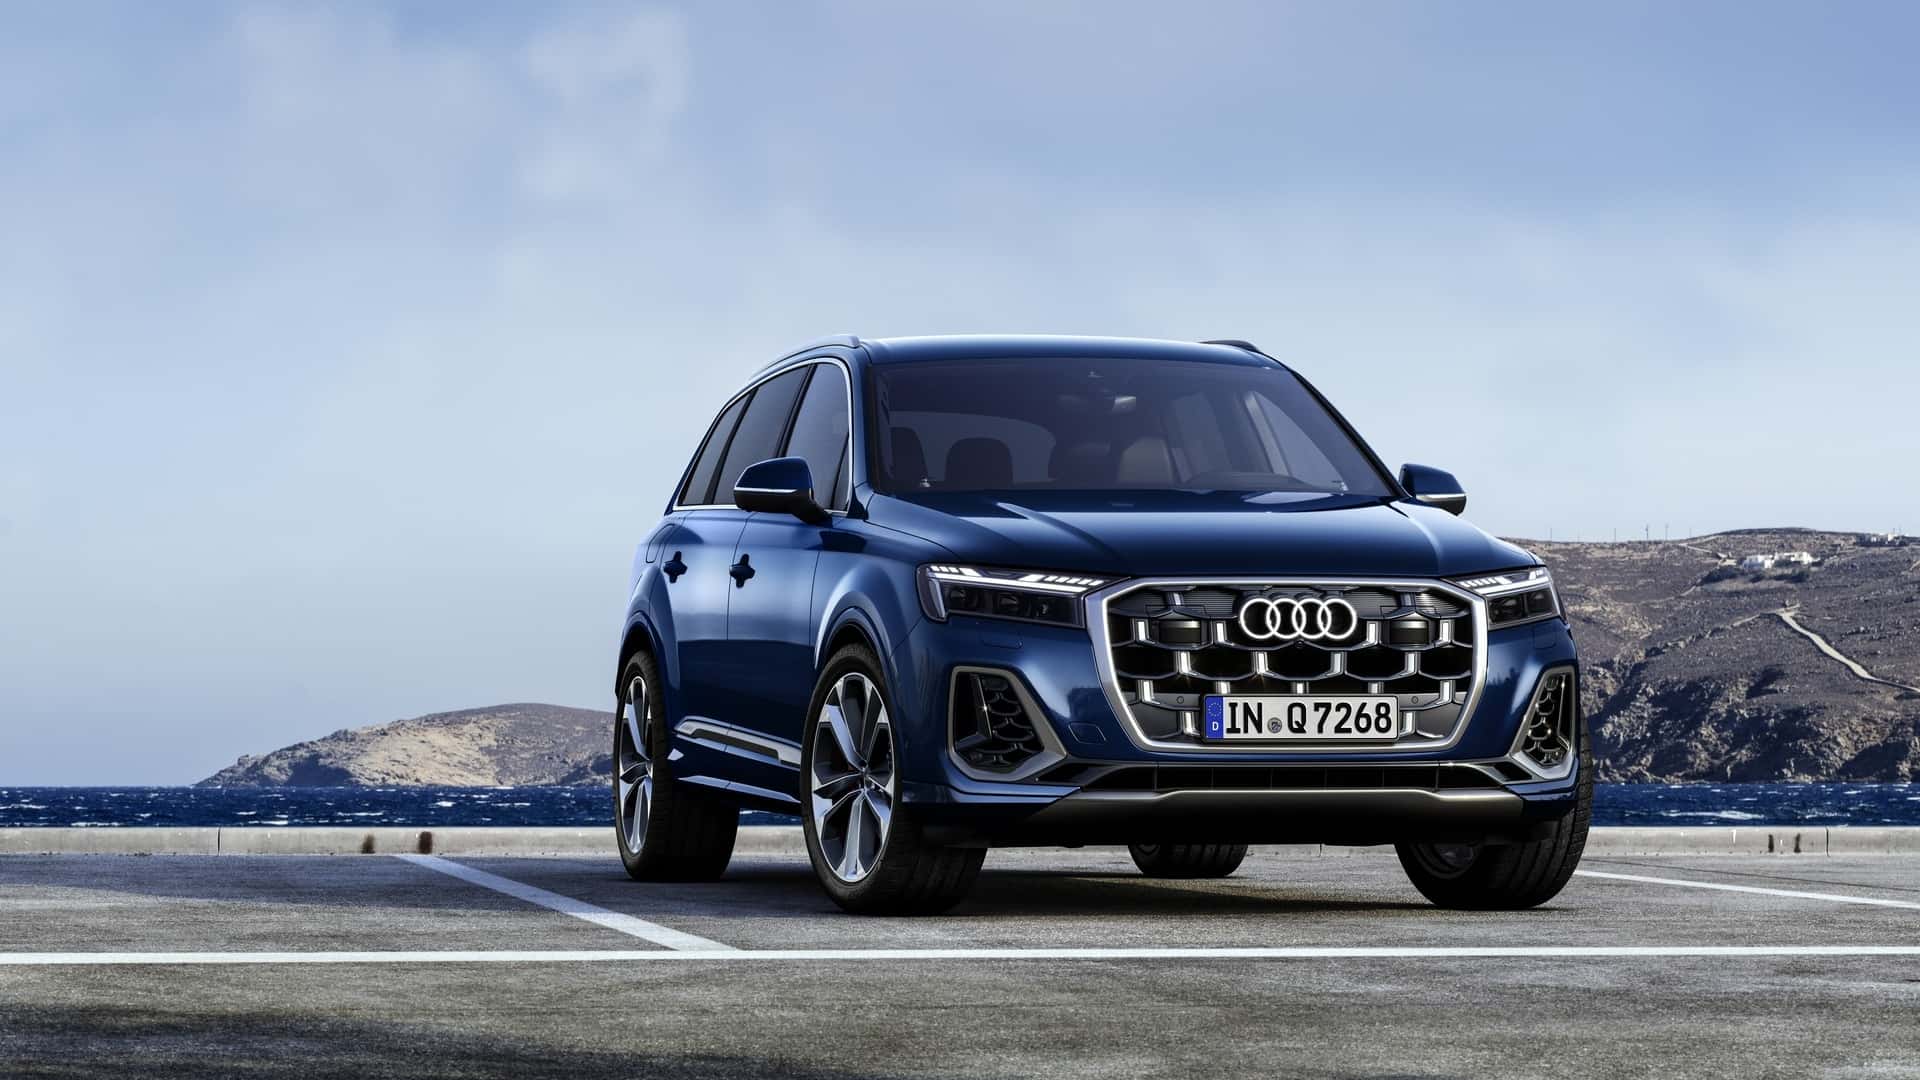 The 2025 Audi Q7 Receives a Refresh and is Priced Closely to the Previous Model